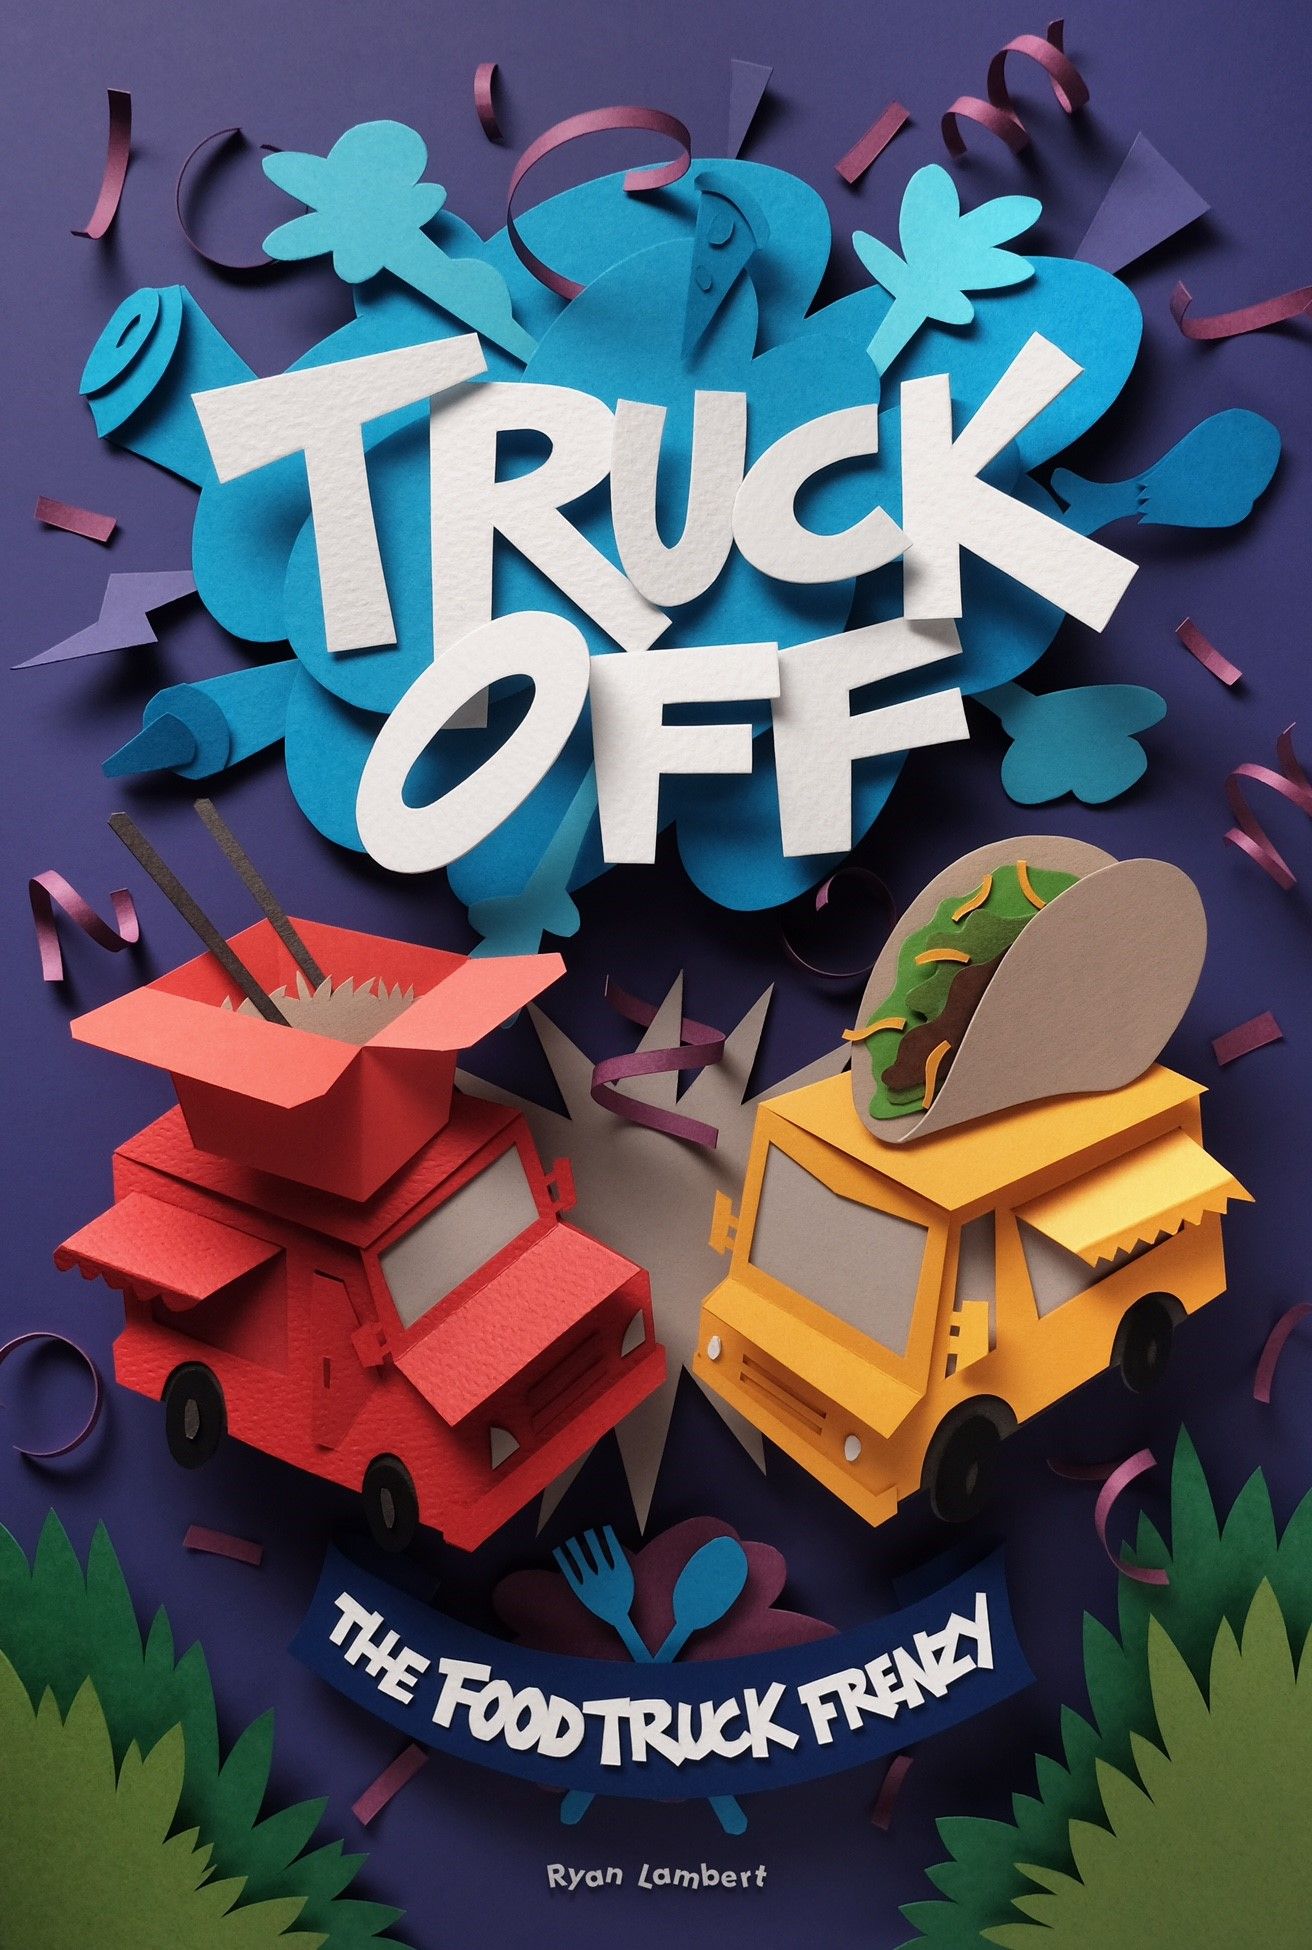 Truck Off: The Food Truck Frenzy